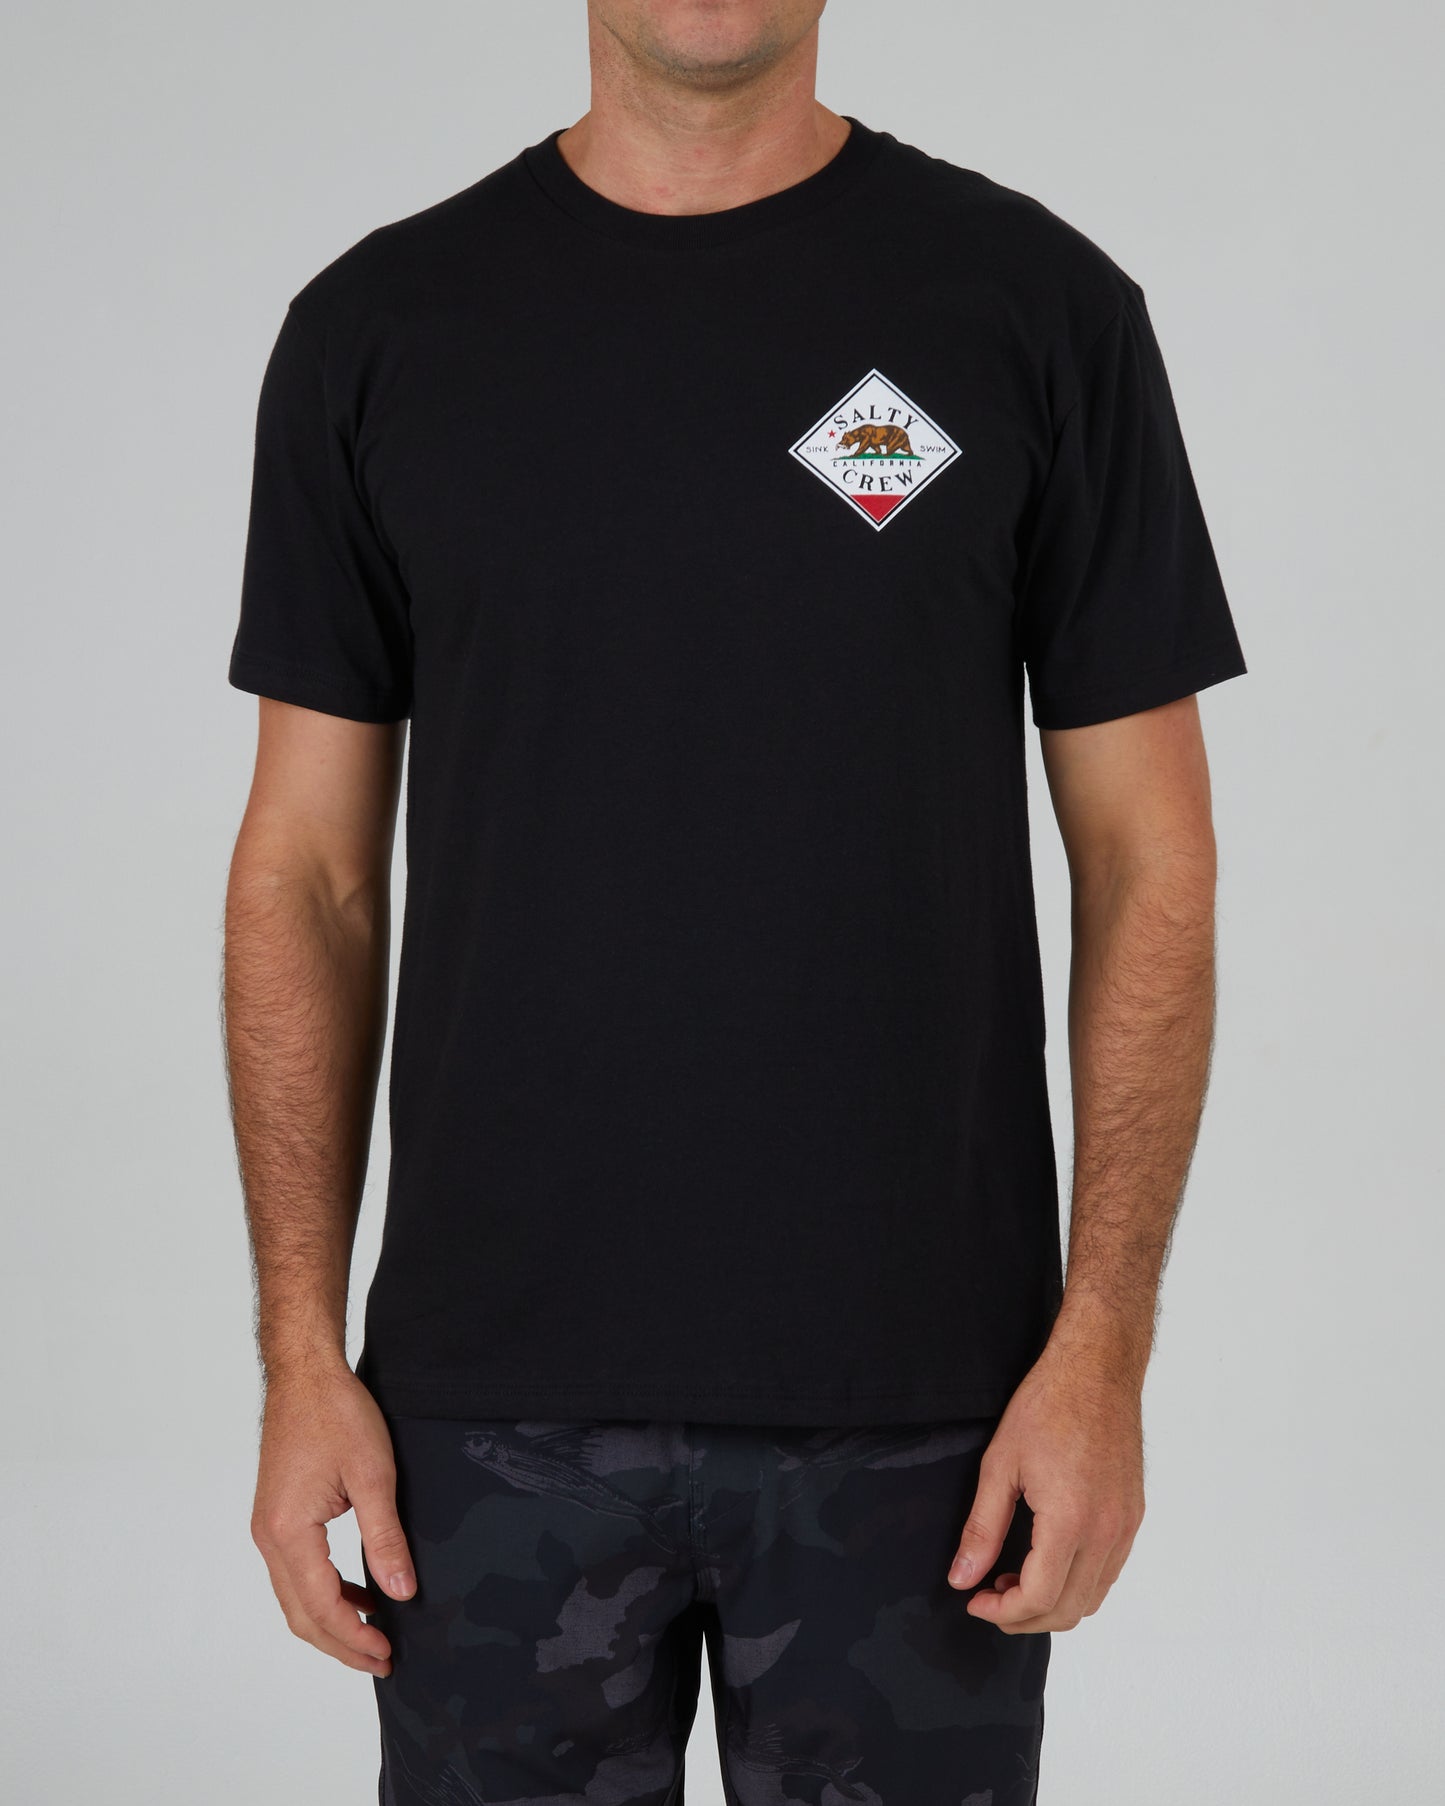 On body front of the Tippet Cali Black S/S Premium Tee